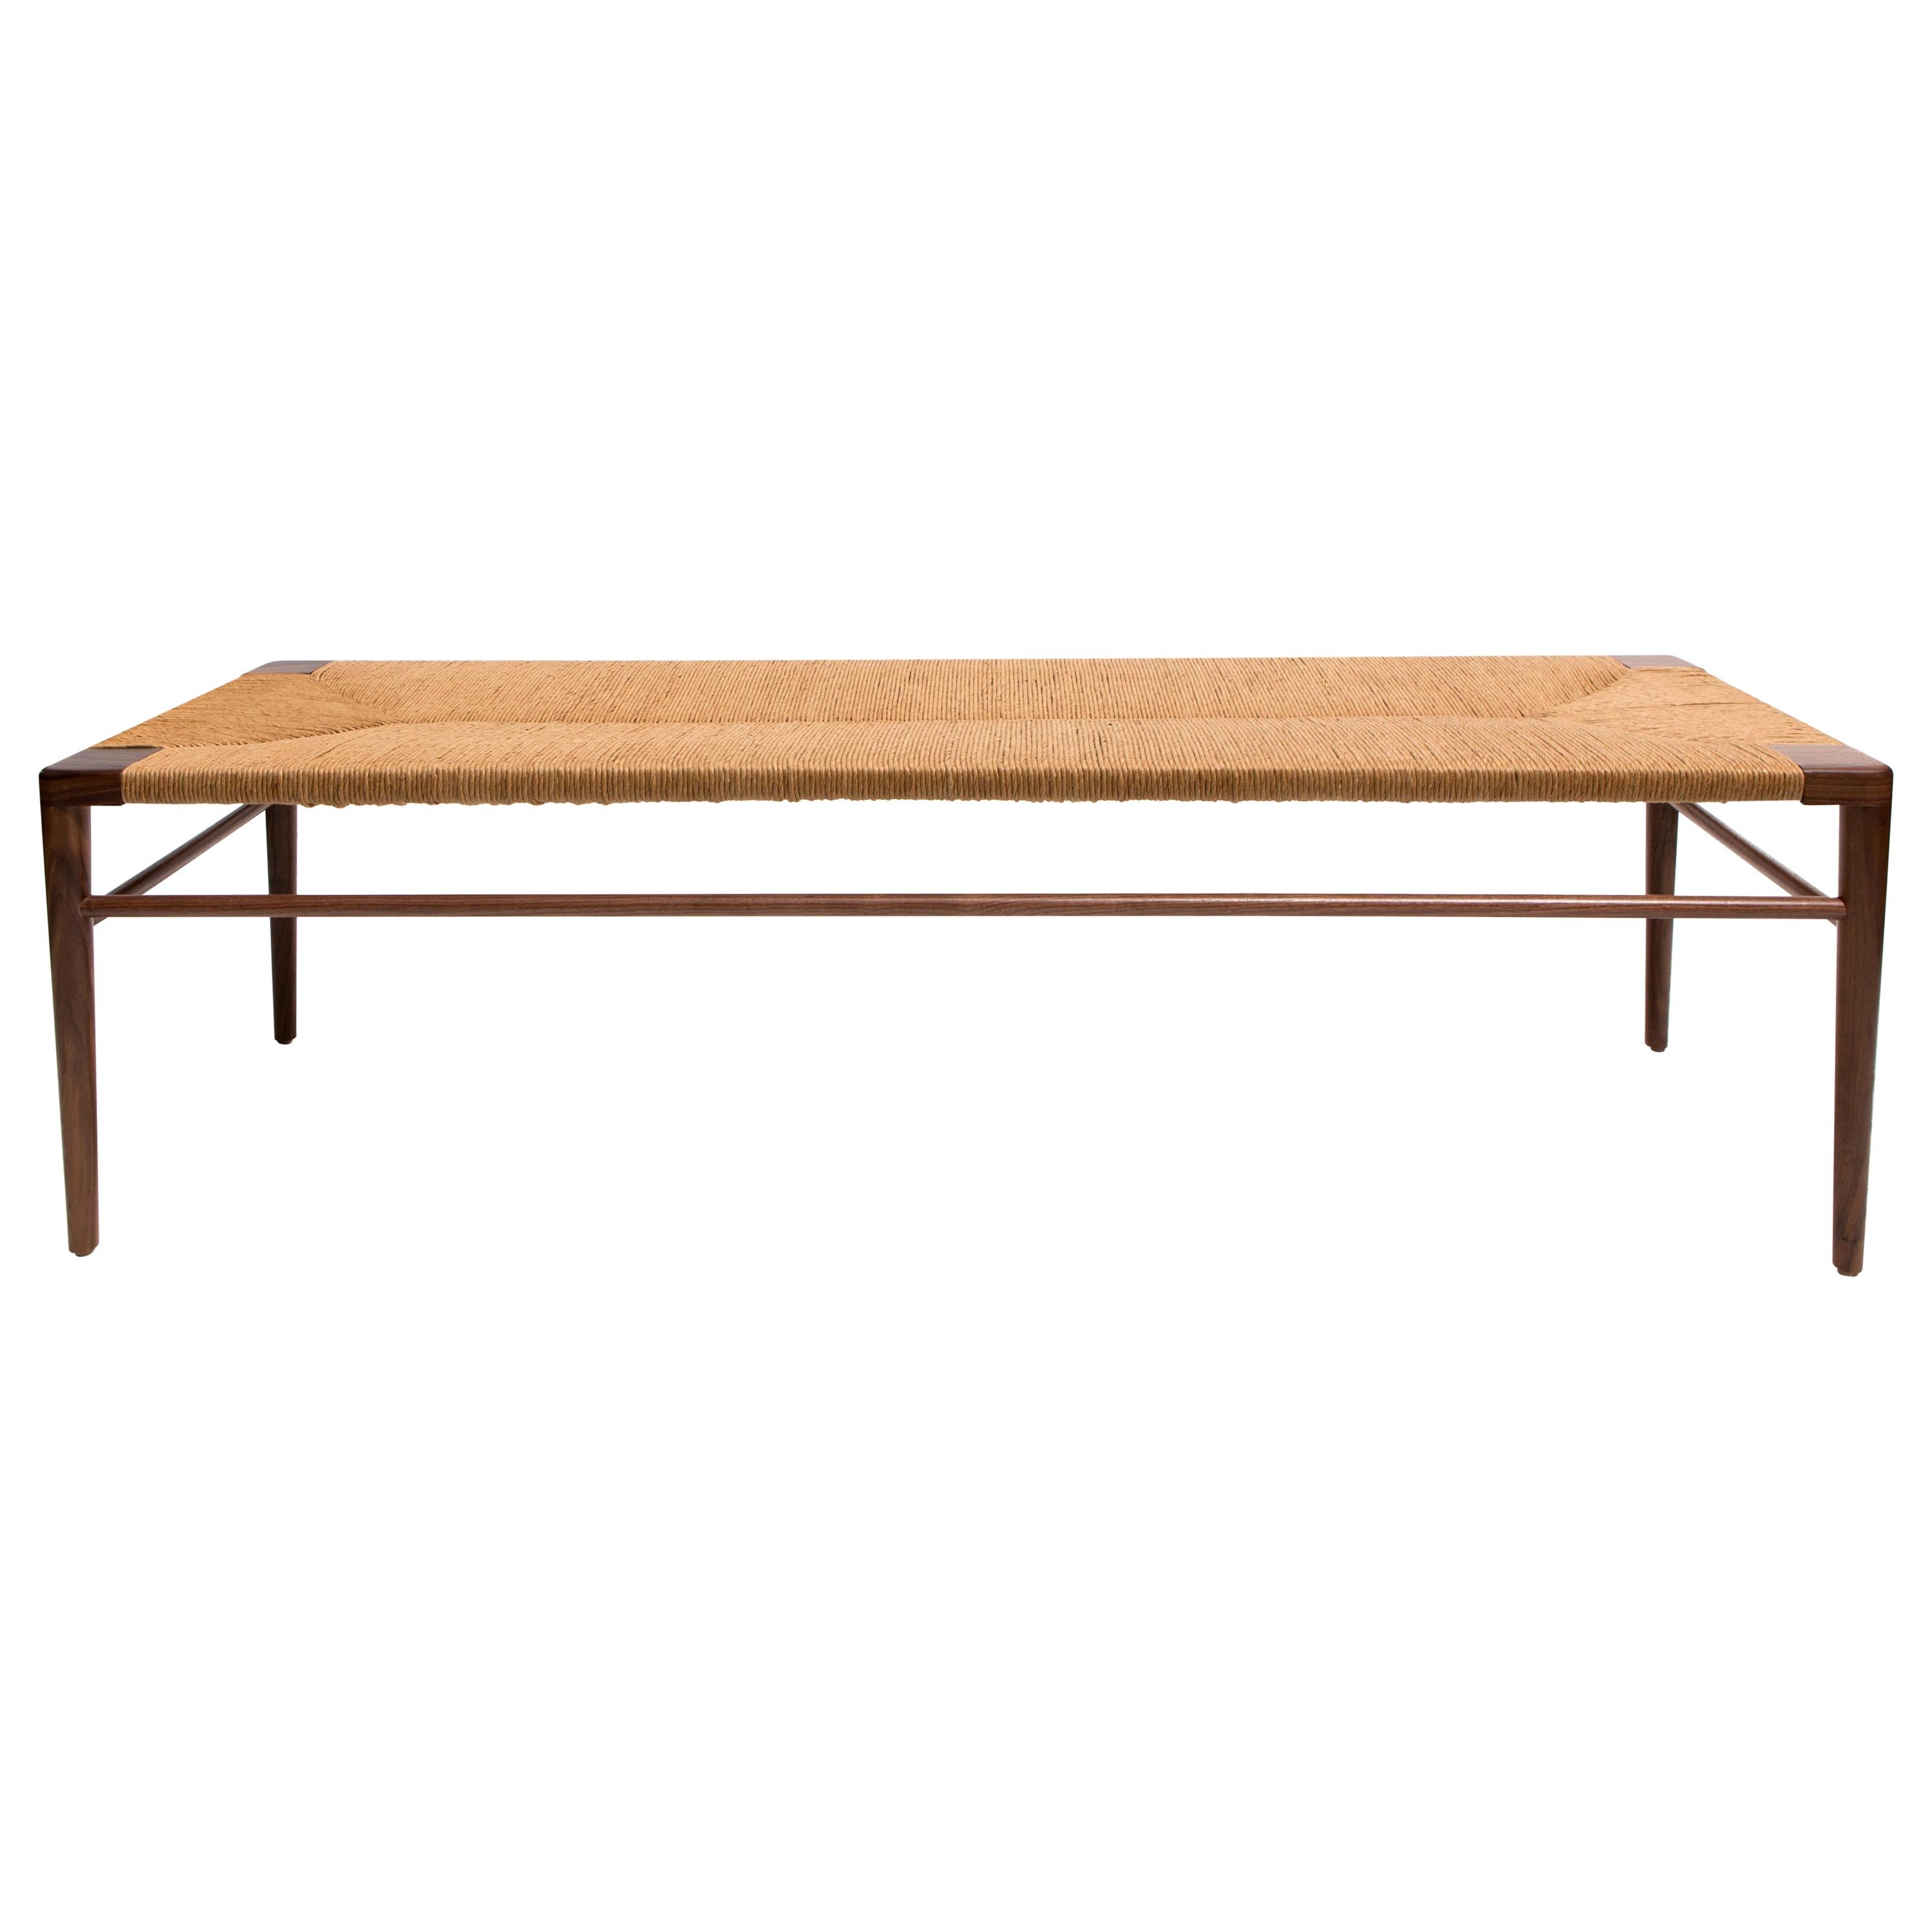 60" Woven Rush Bench in Walnut by Mel Smilow For Sale